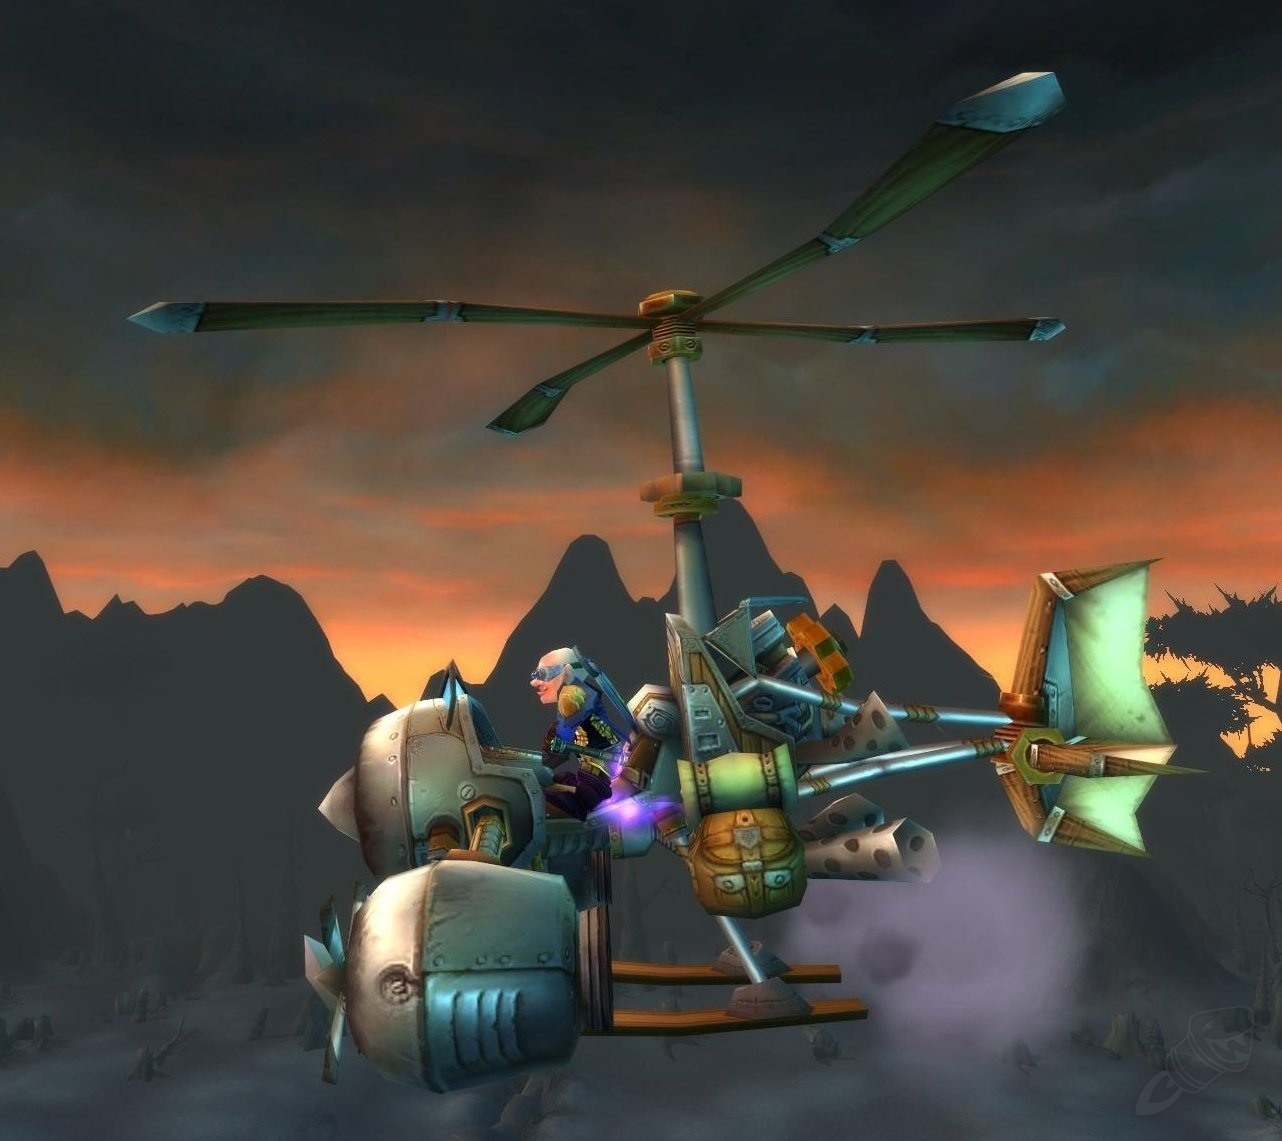 How to Unlock Flying in Burning Crusade Classic and Acquire Flying Mounts -  Wowhead